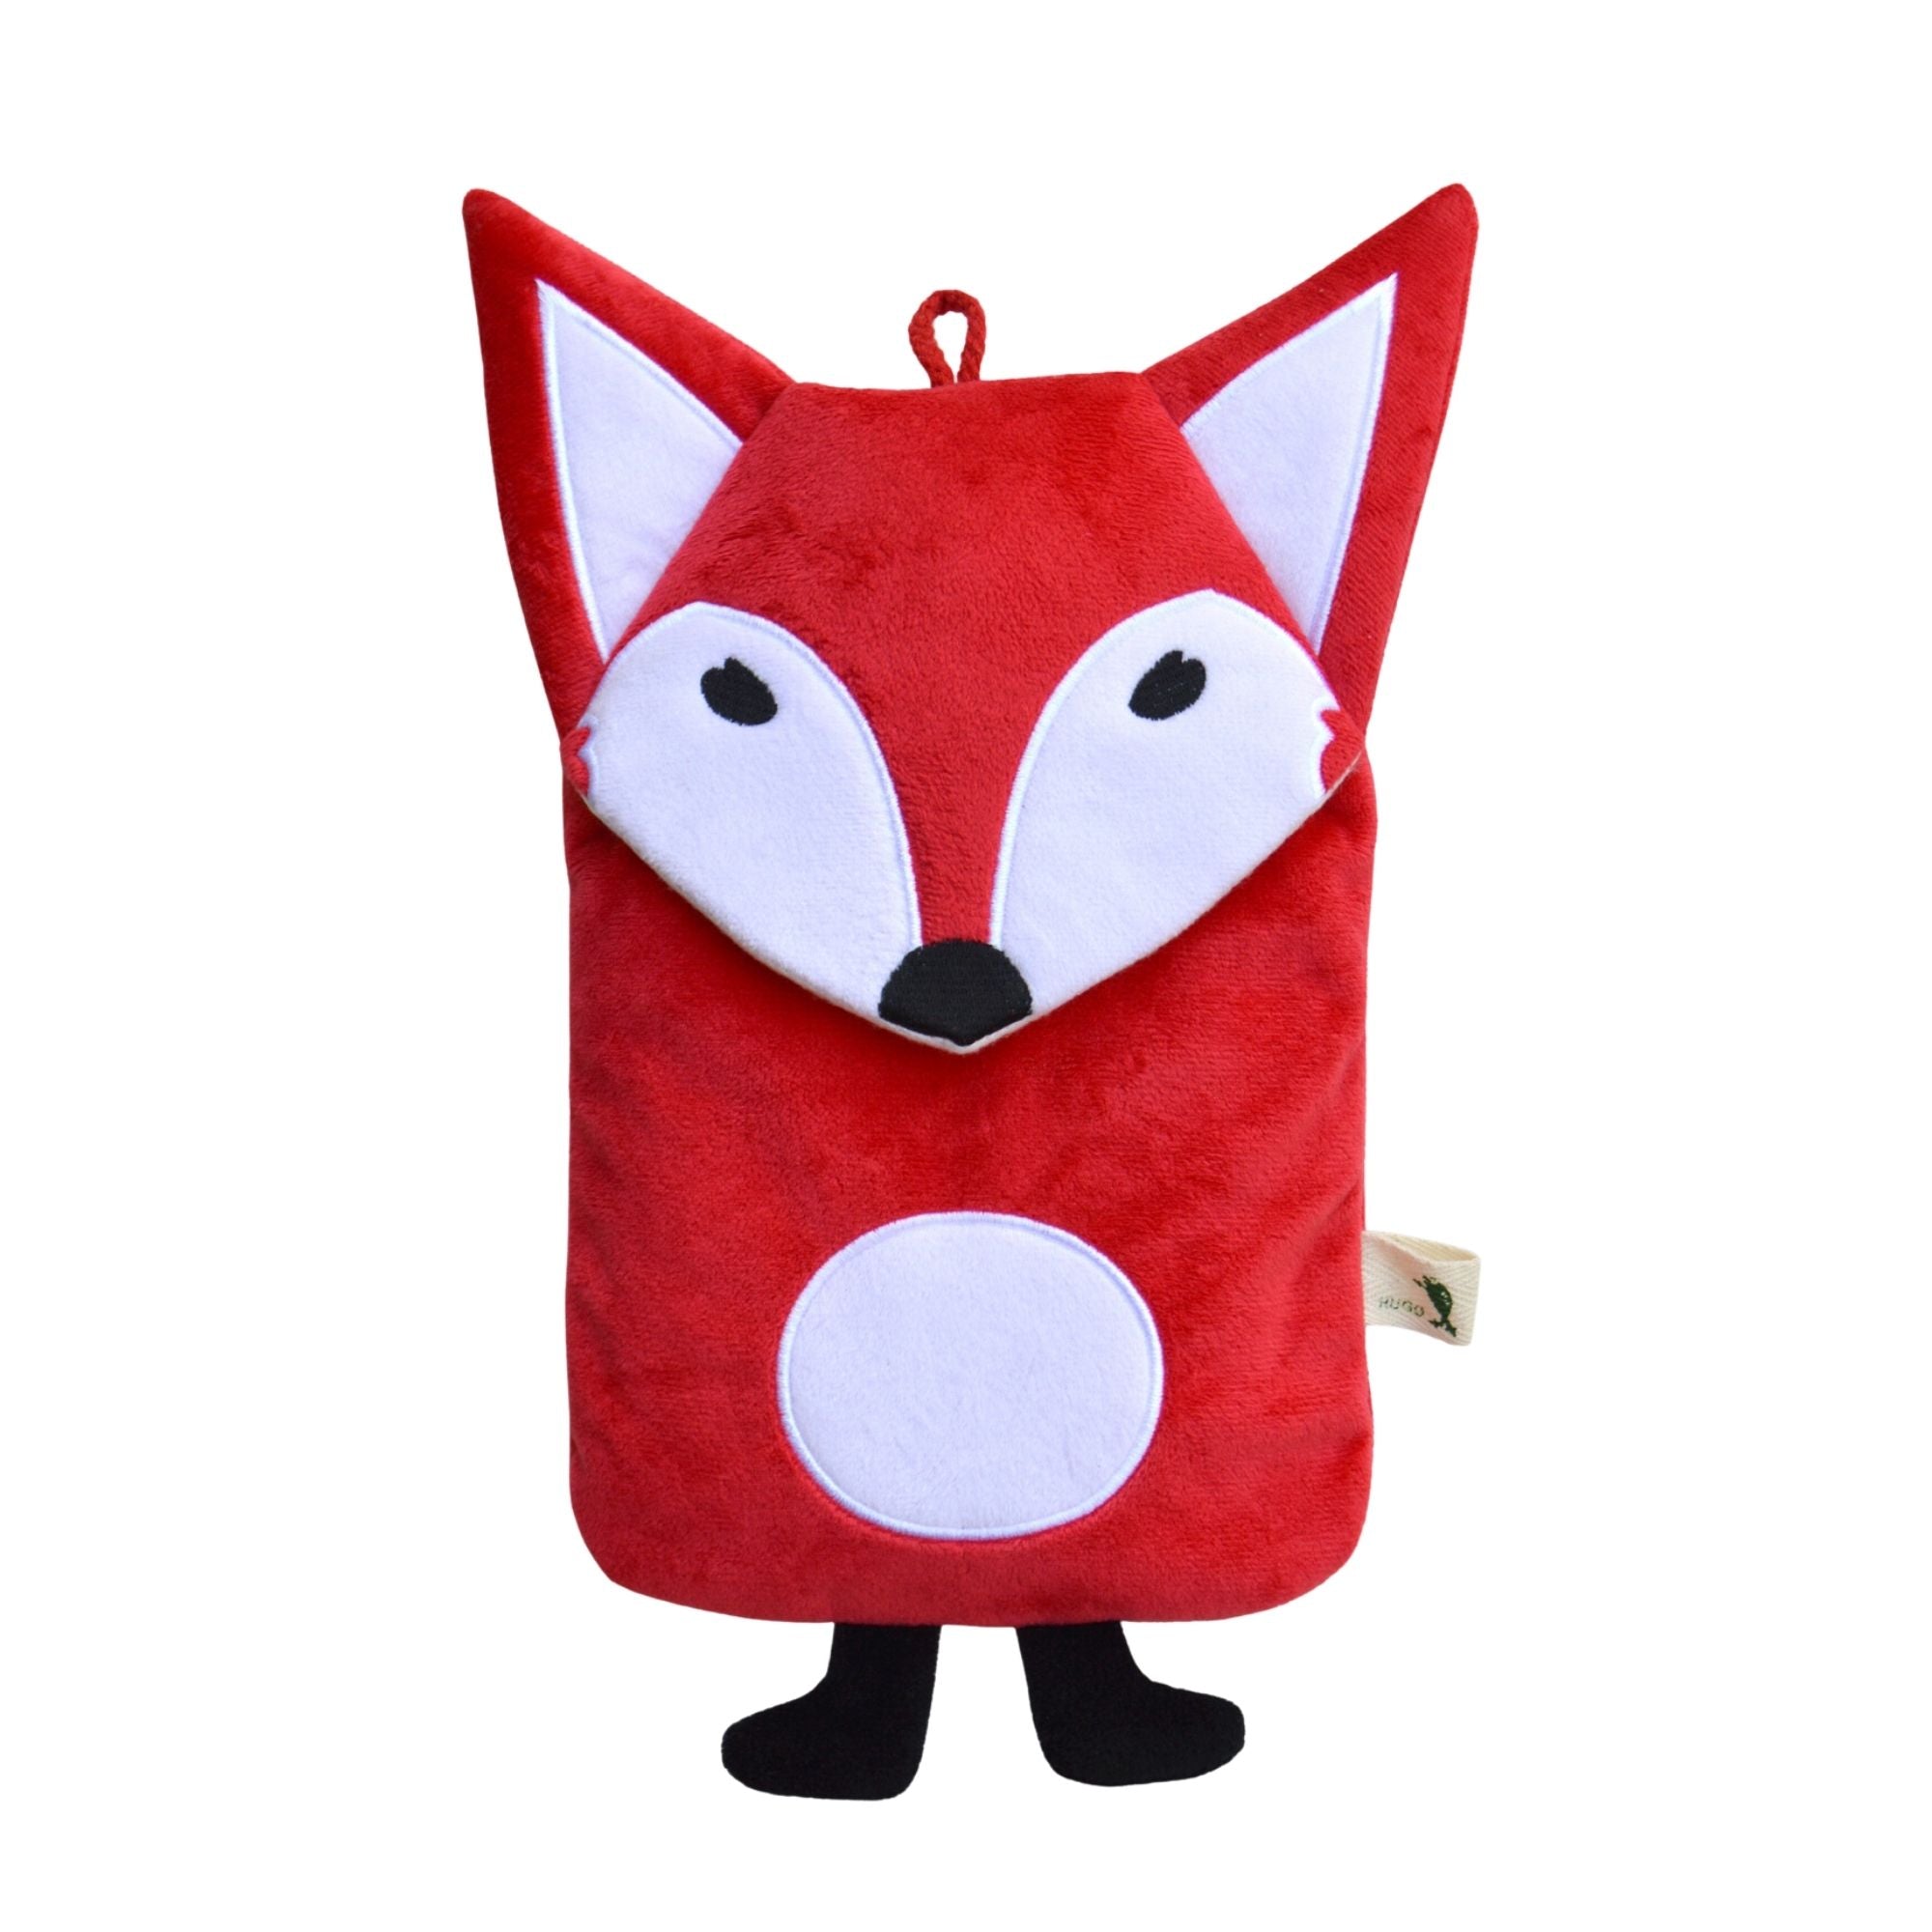 0.8 Litre Eco Hot Water Bottle with Red Fox Cover - Front